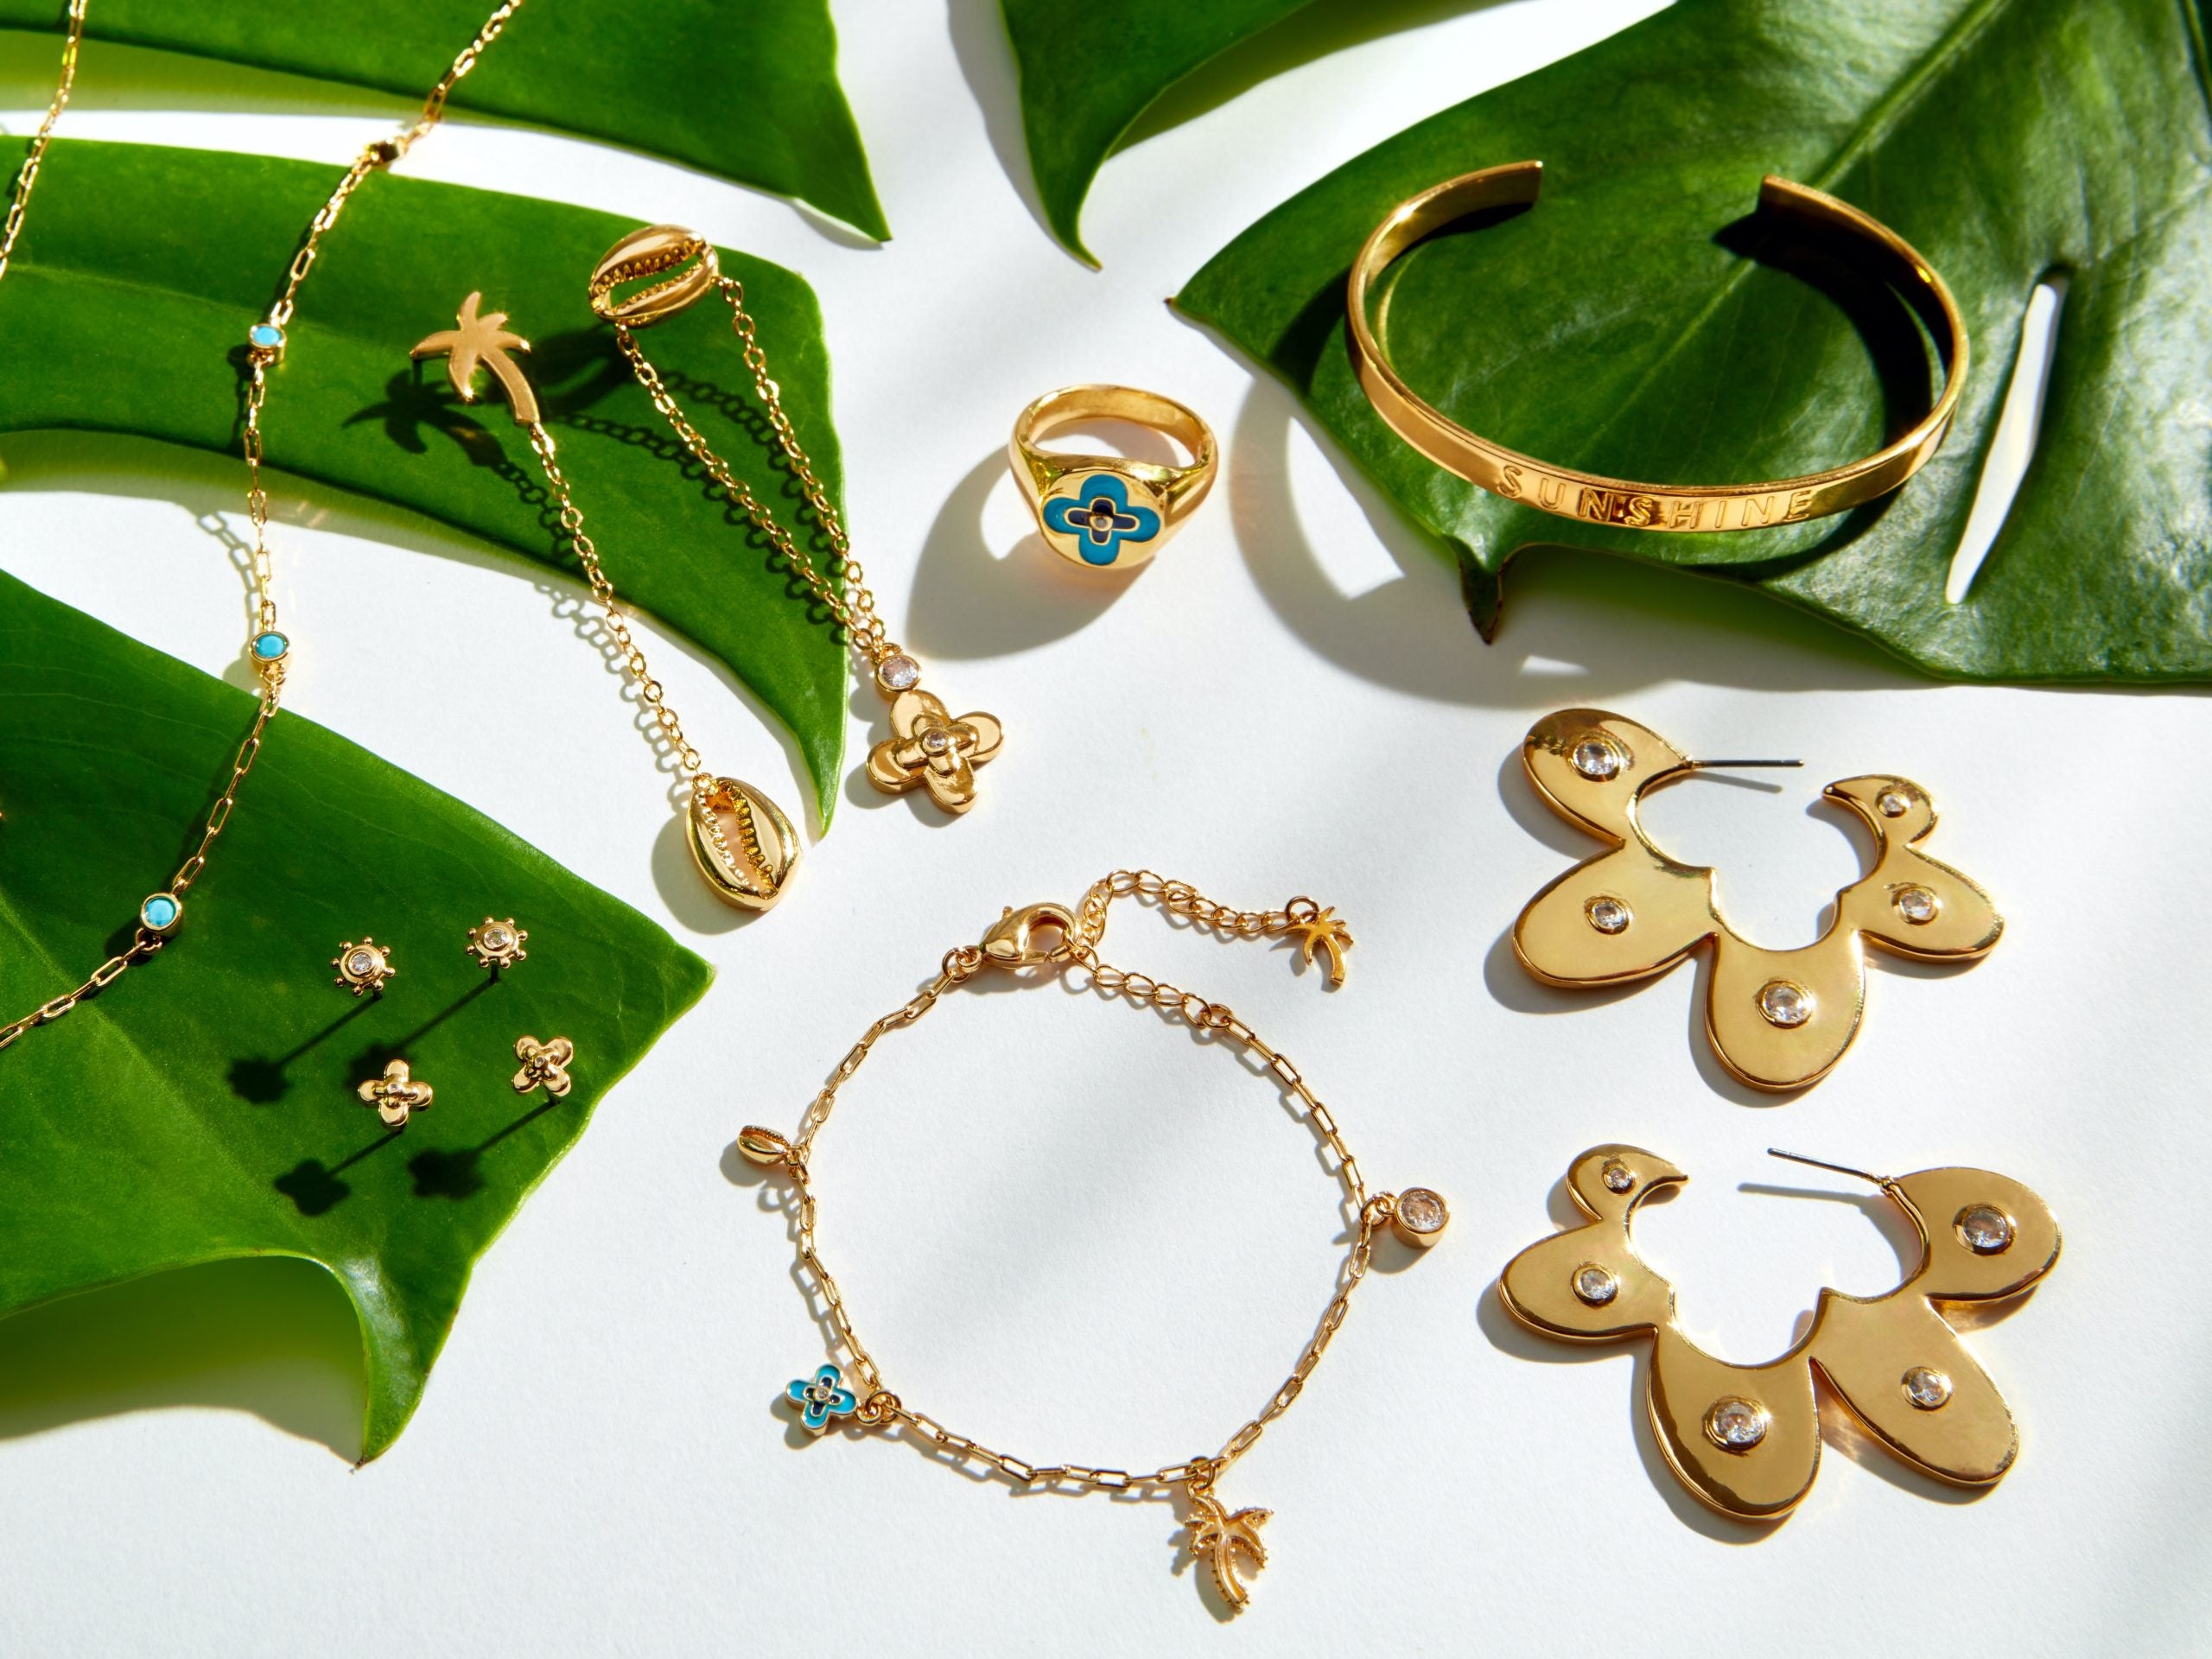 Jam + Rico Tapped By Claire's To Create A Caribbean-Inspired Collection